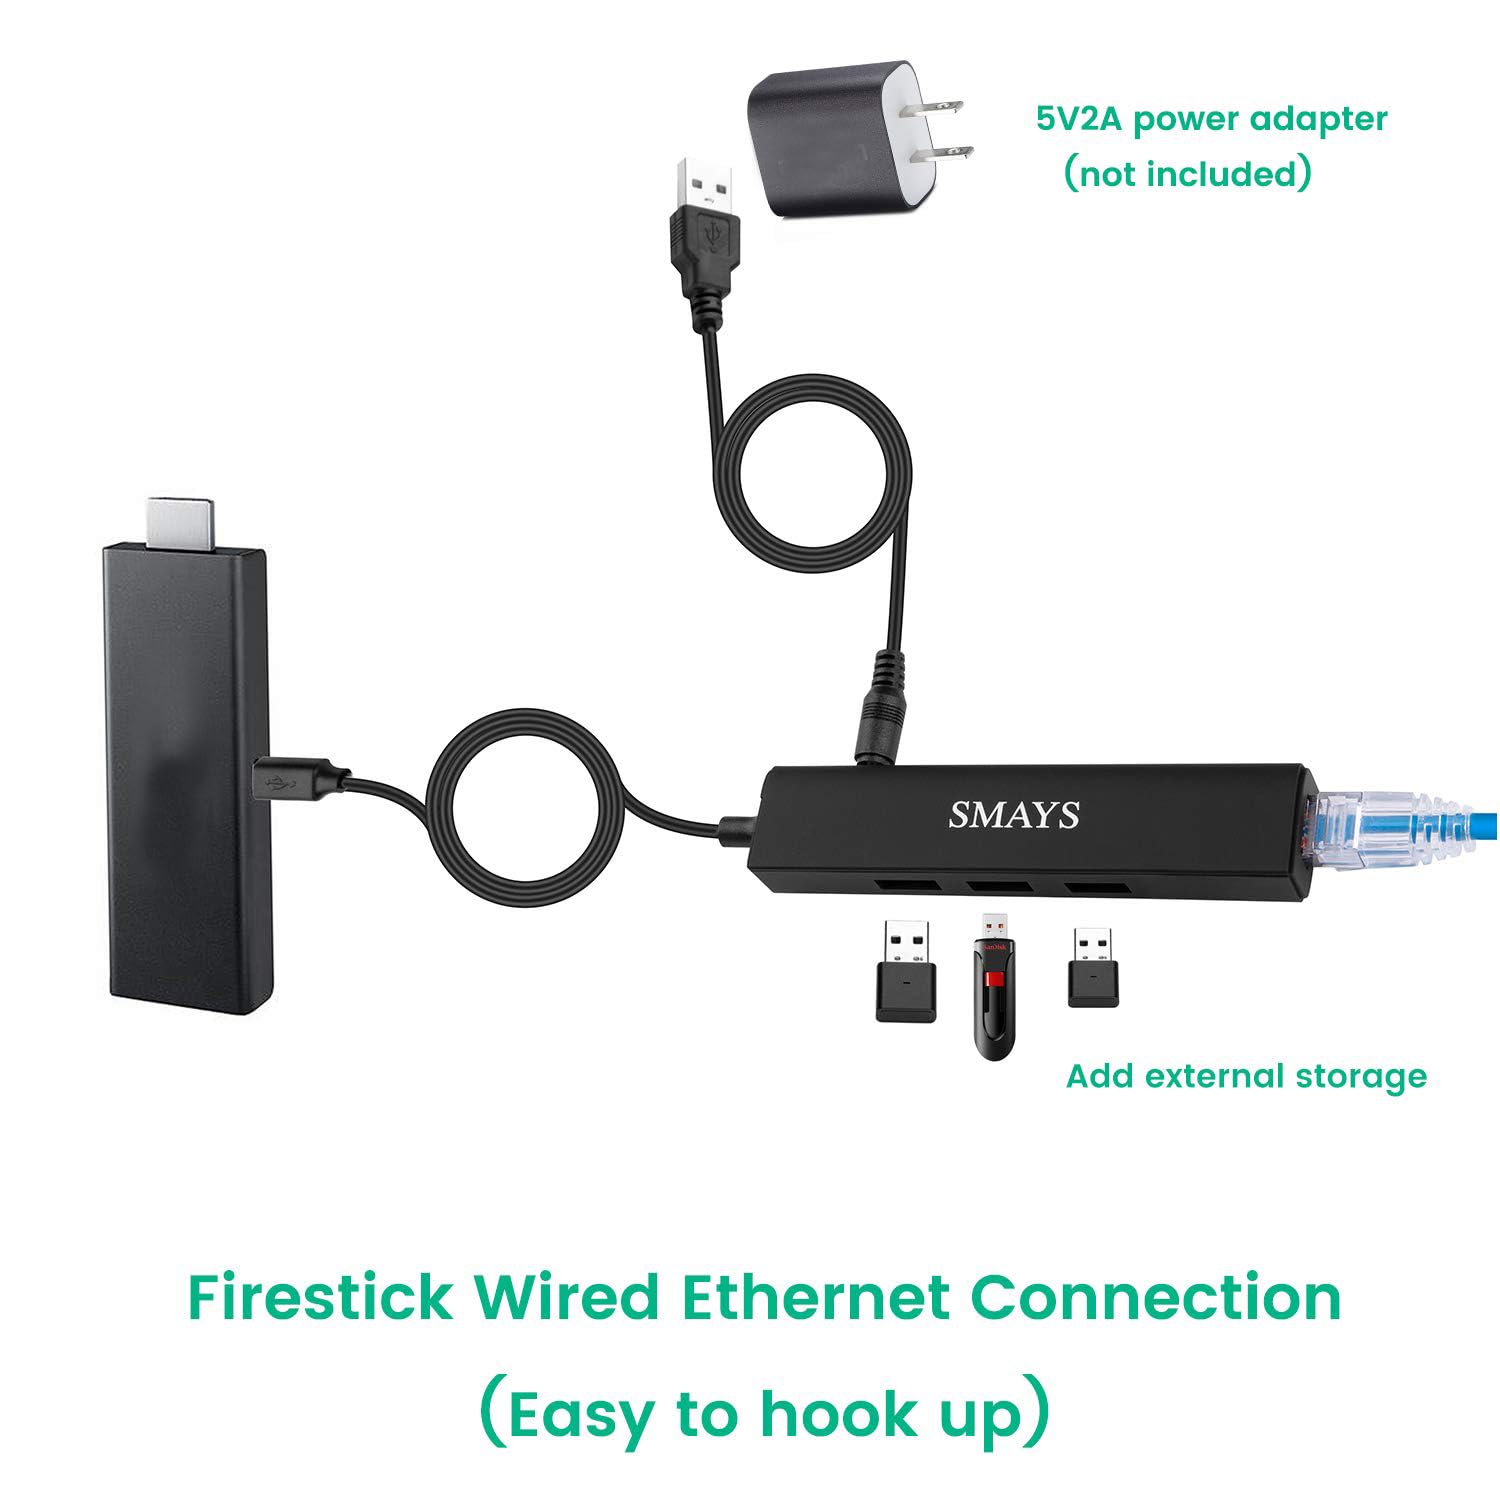 Connect External Storage Device:
Locate an available USB port on the Fire Stick device.